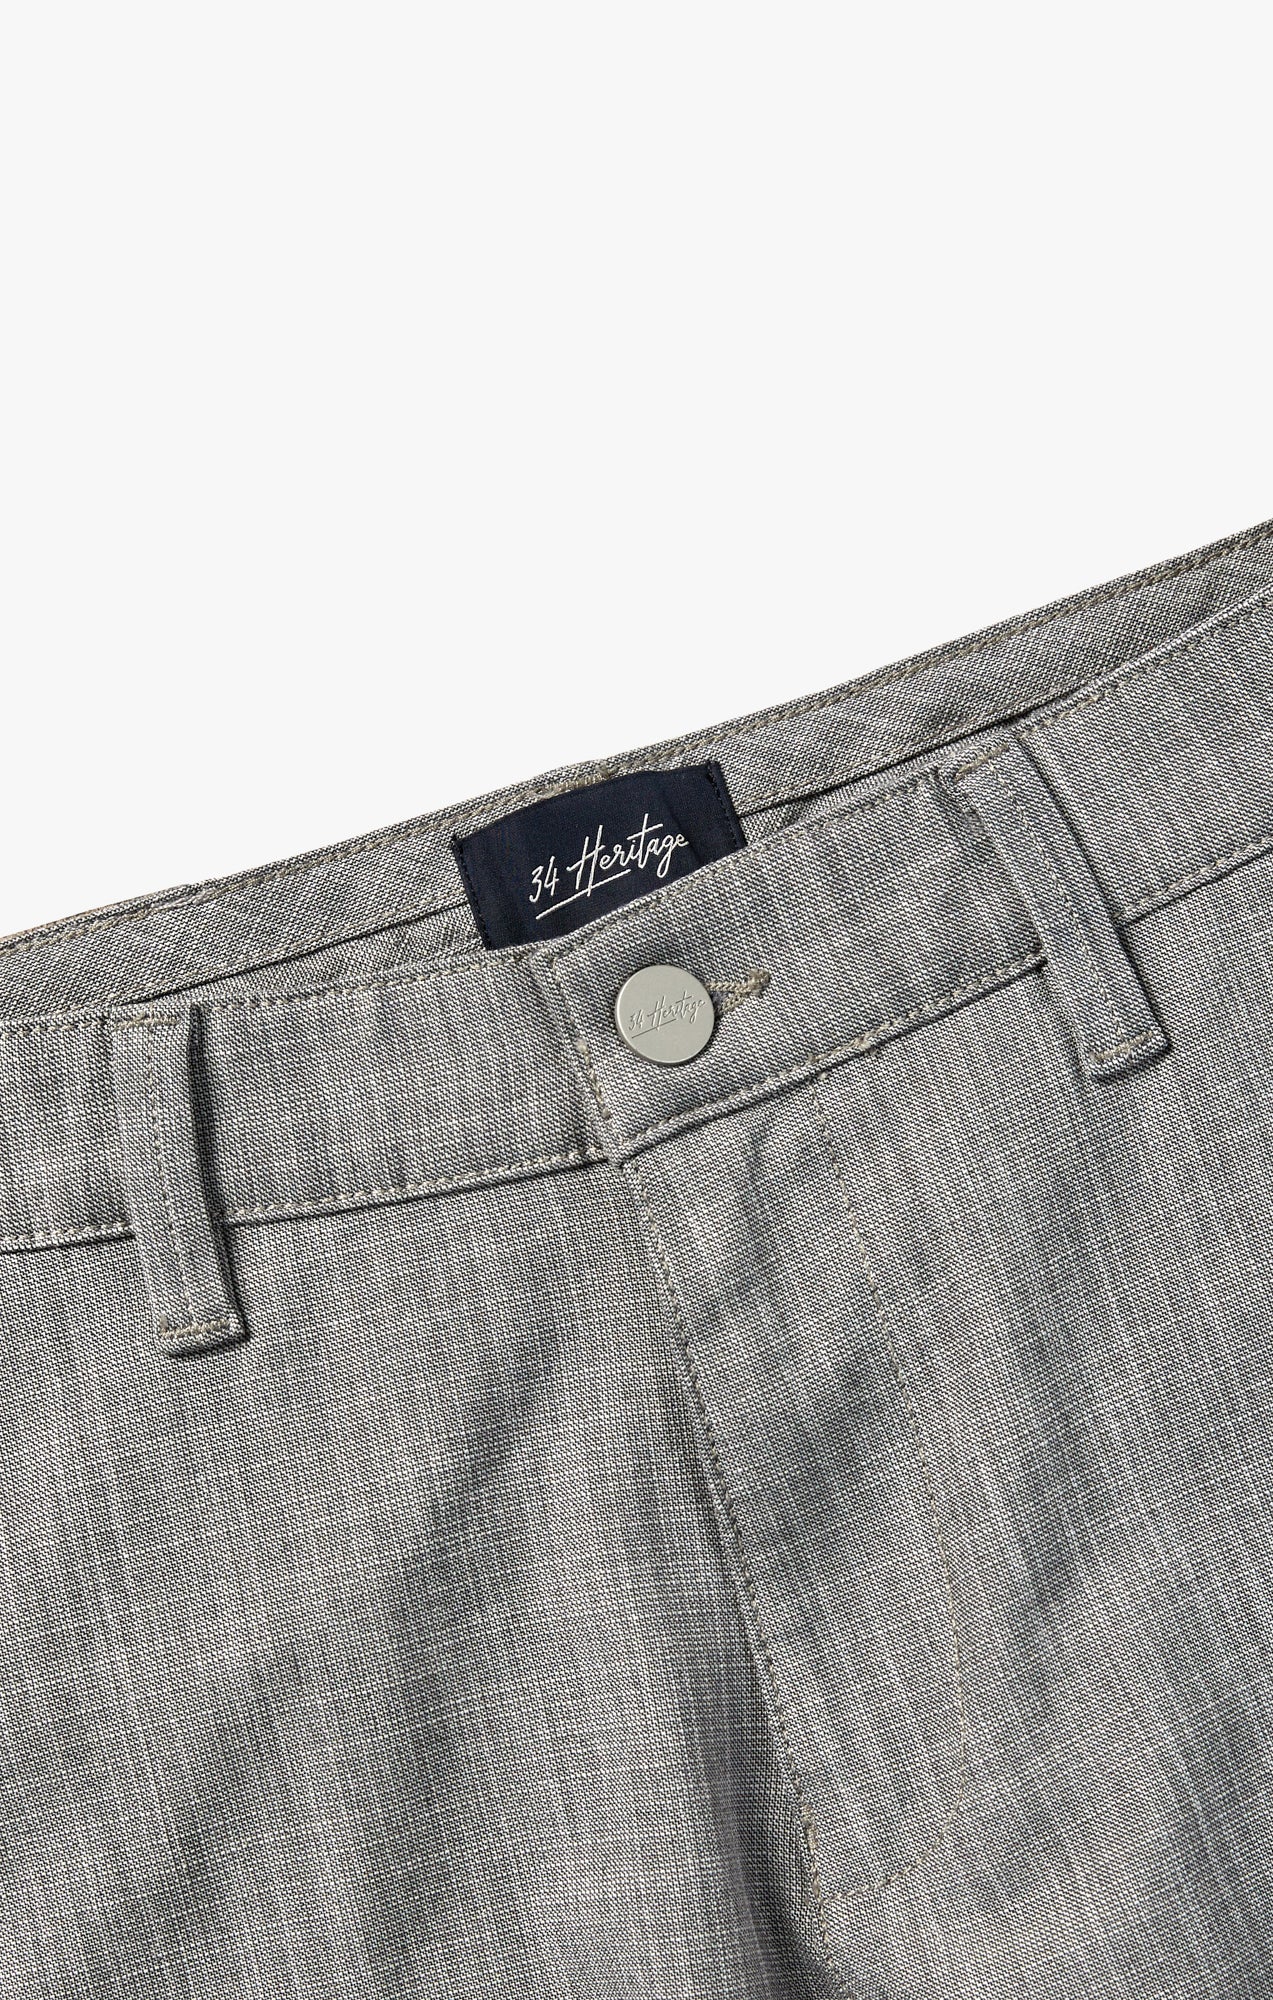 Nevada Shorts In Magnet Cross Twill Image 9